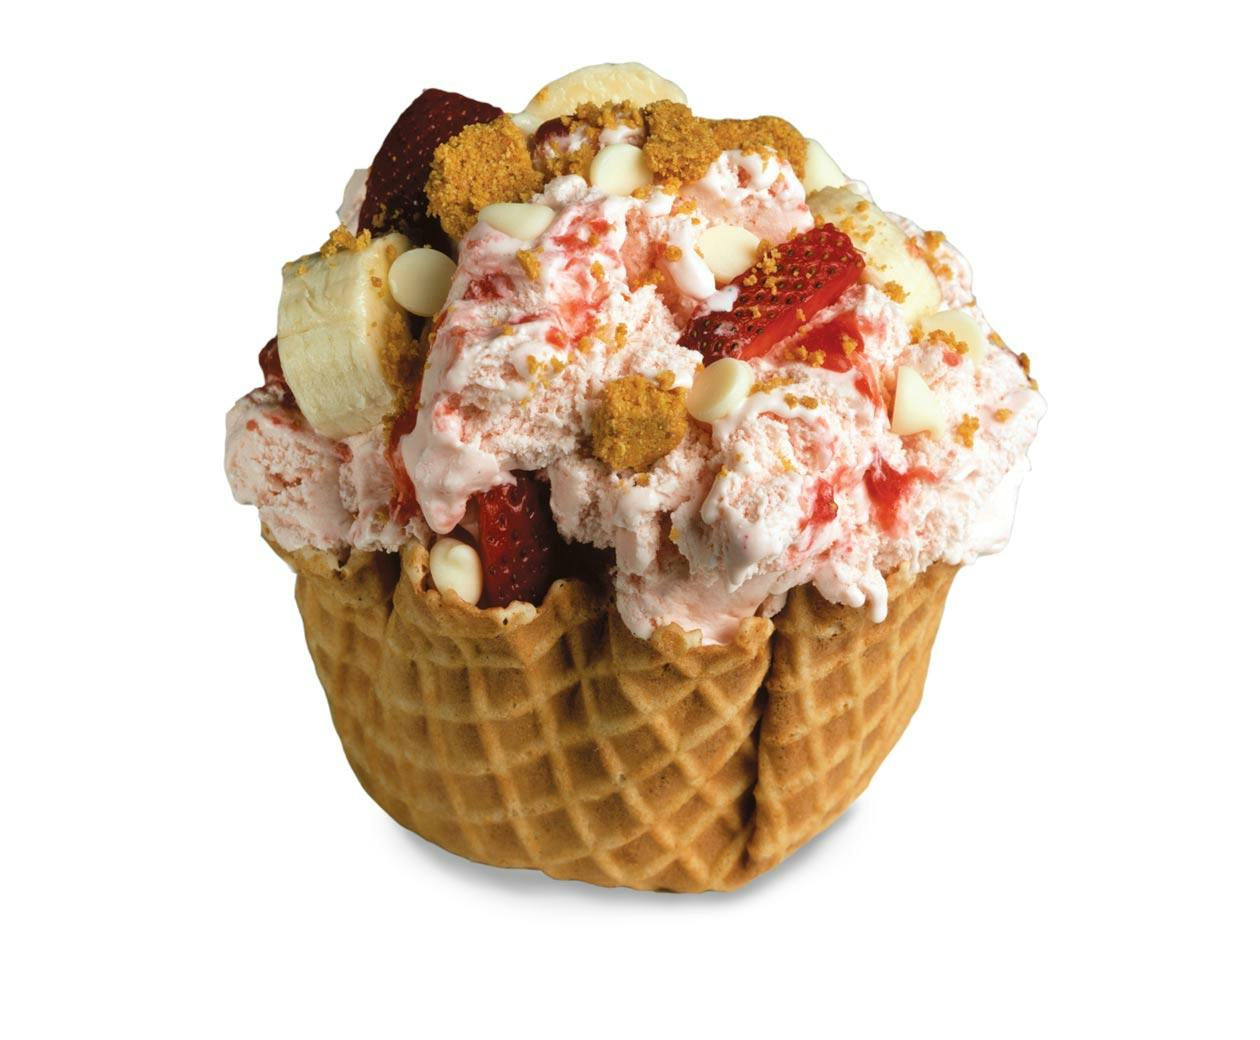 Strawberry Banana Rendezvous from Cold Stone Creamery - Green Bay in Green Bay, WI